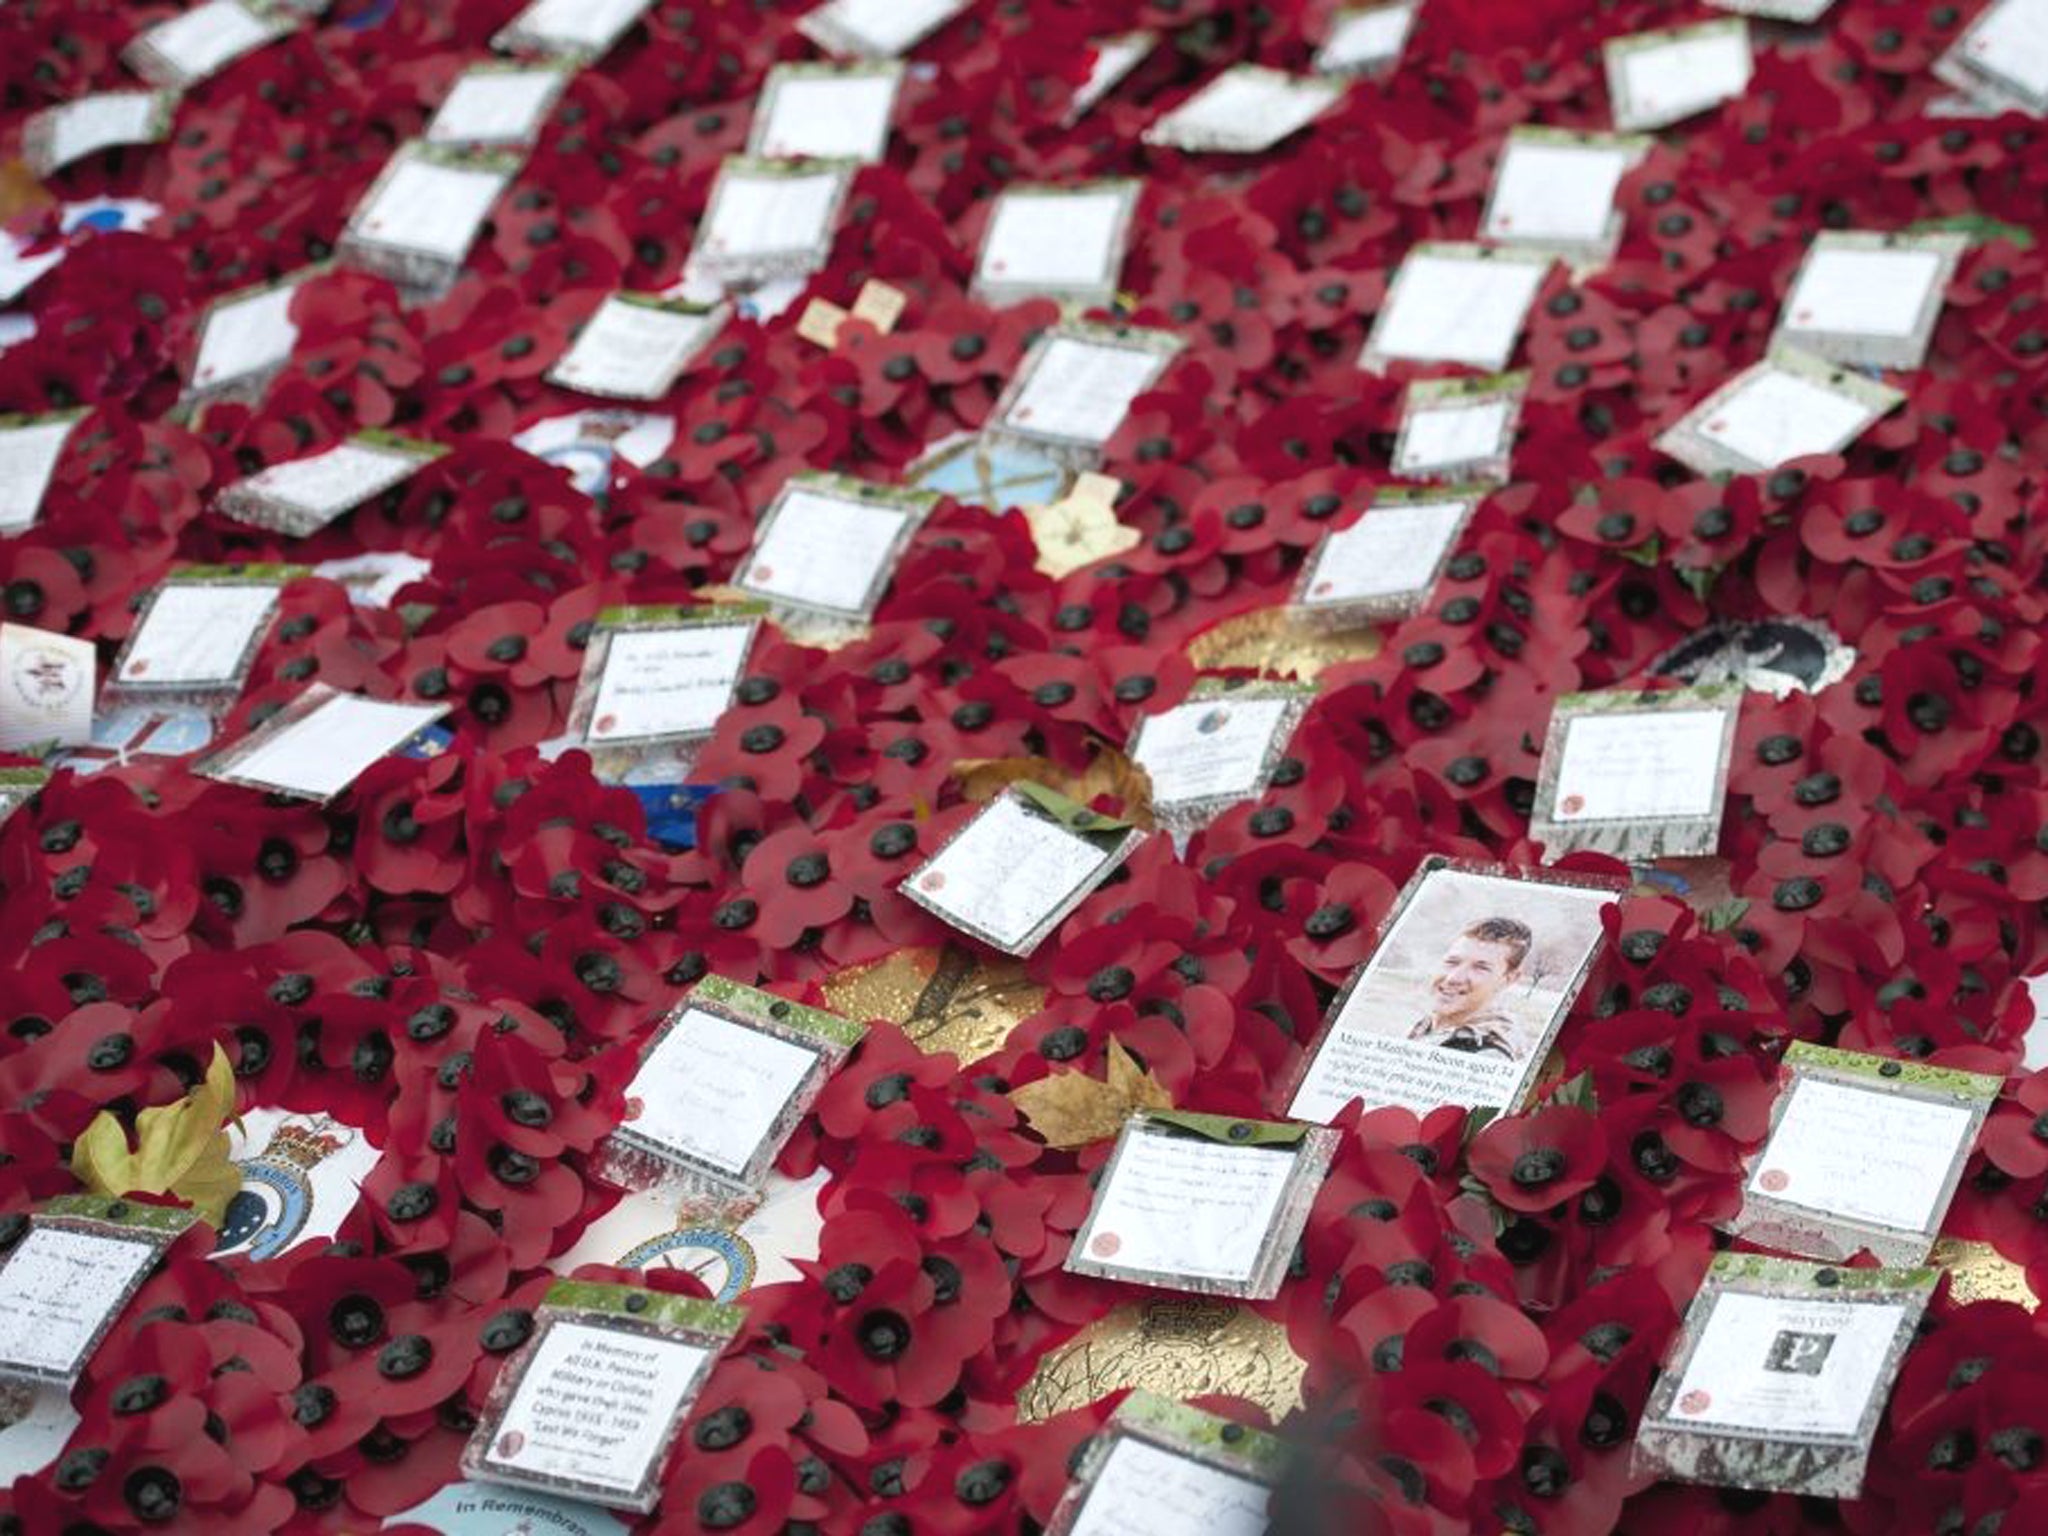 Poppy wreaths lie on the ground during a commemorative service on Armistice Day at the Cenotaph in central London